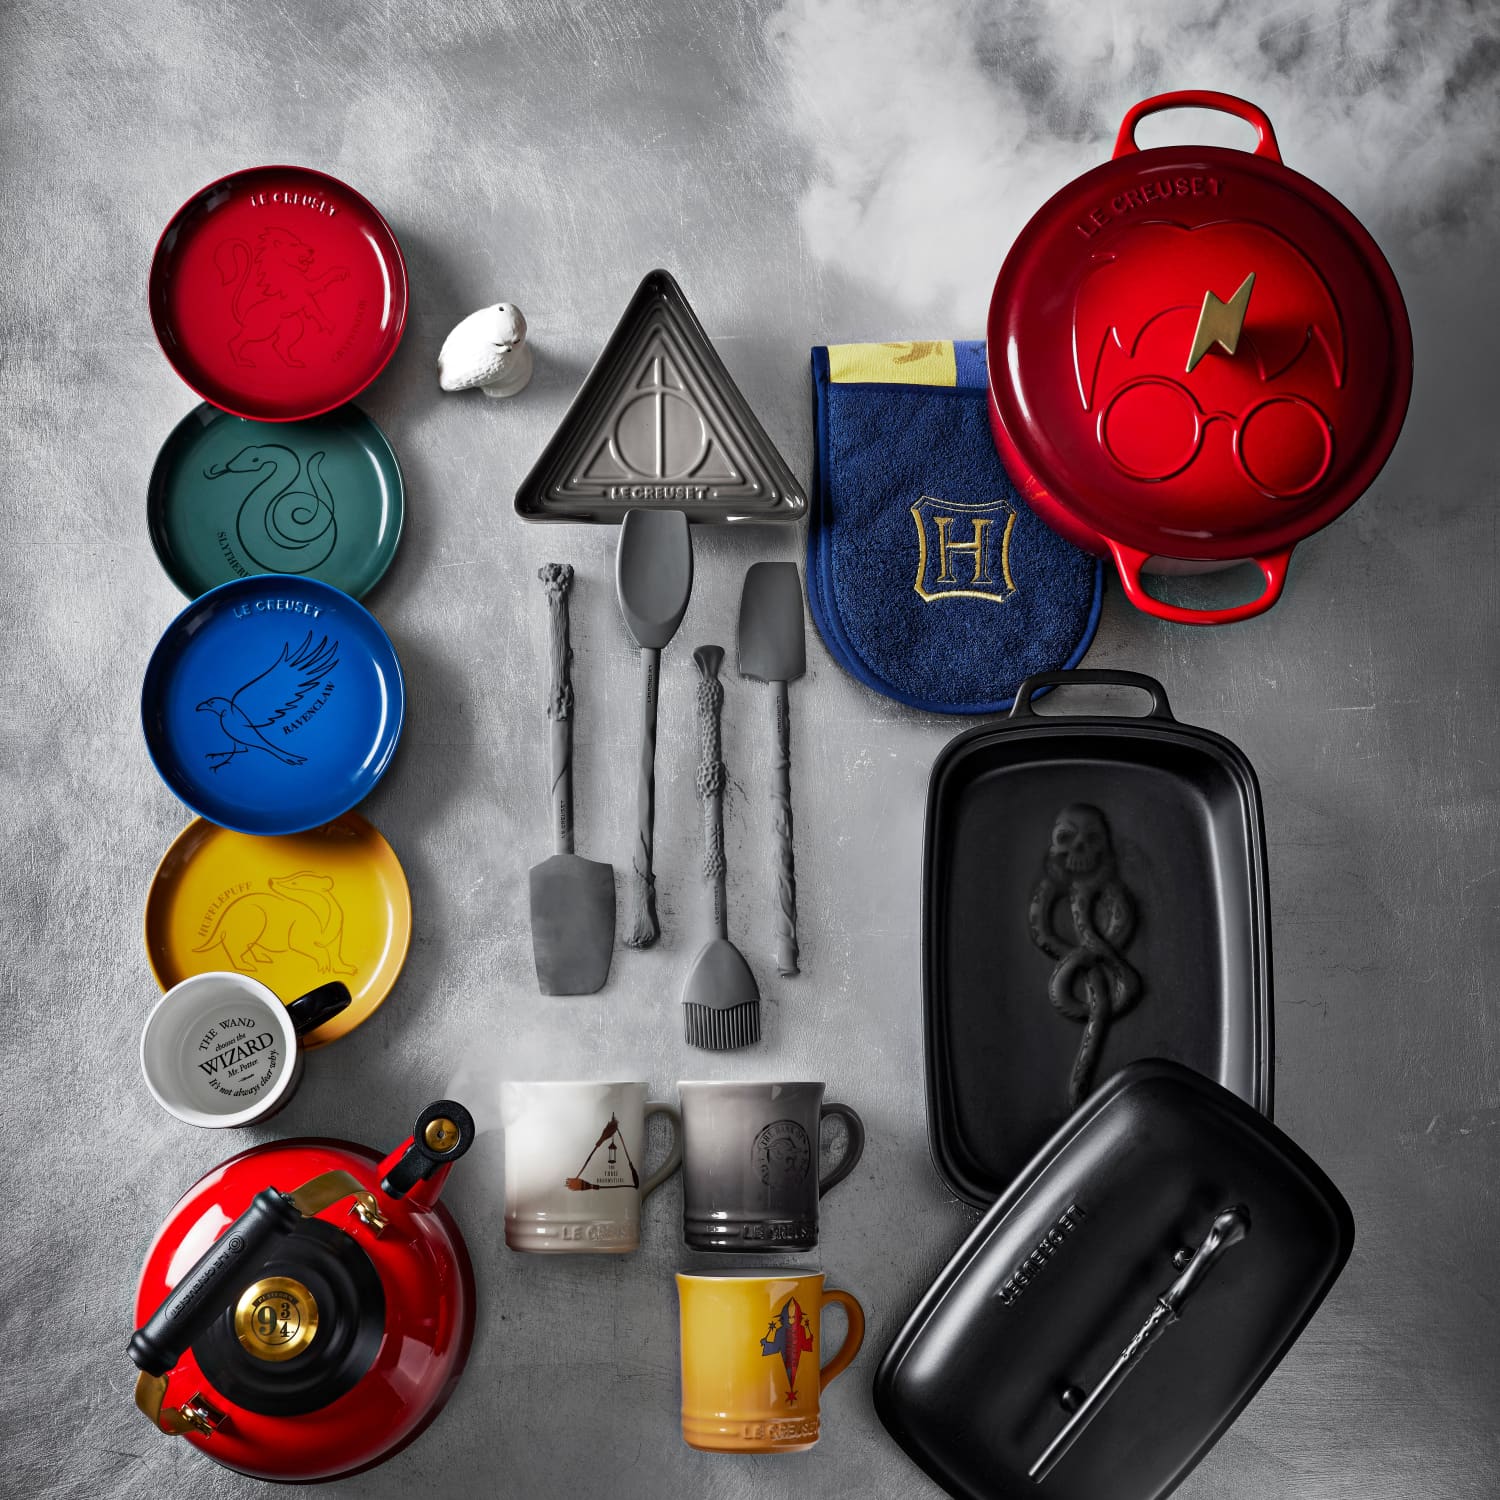 Le Creuset Harry Potter Collection - Williams Sonoma Launch 2021